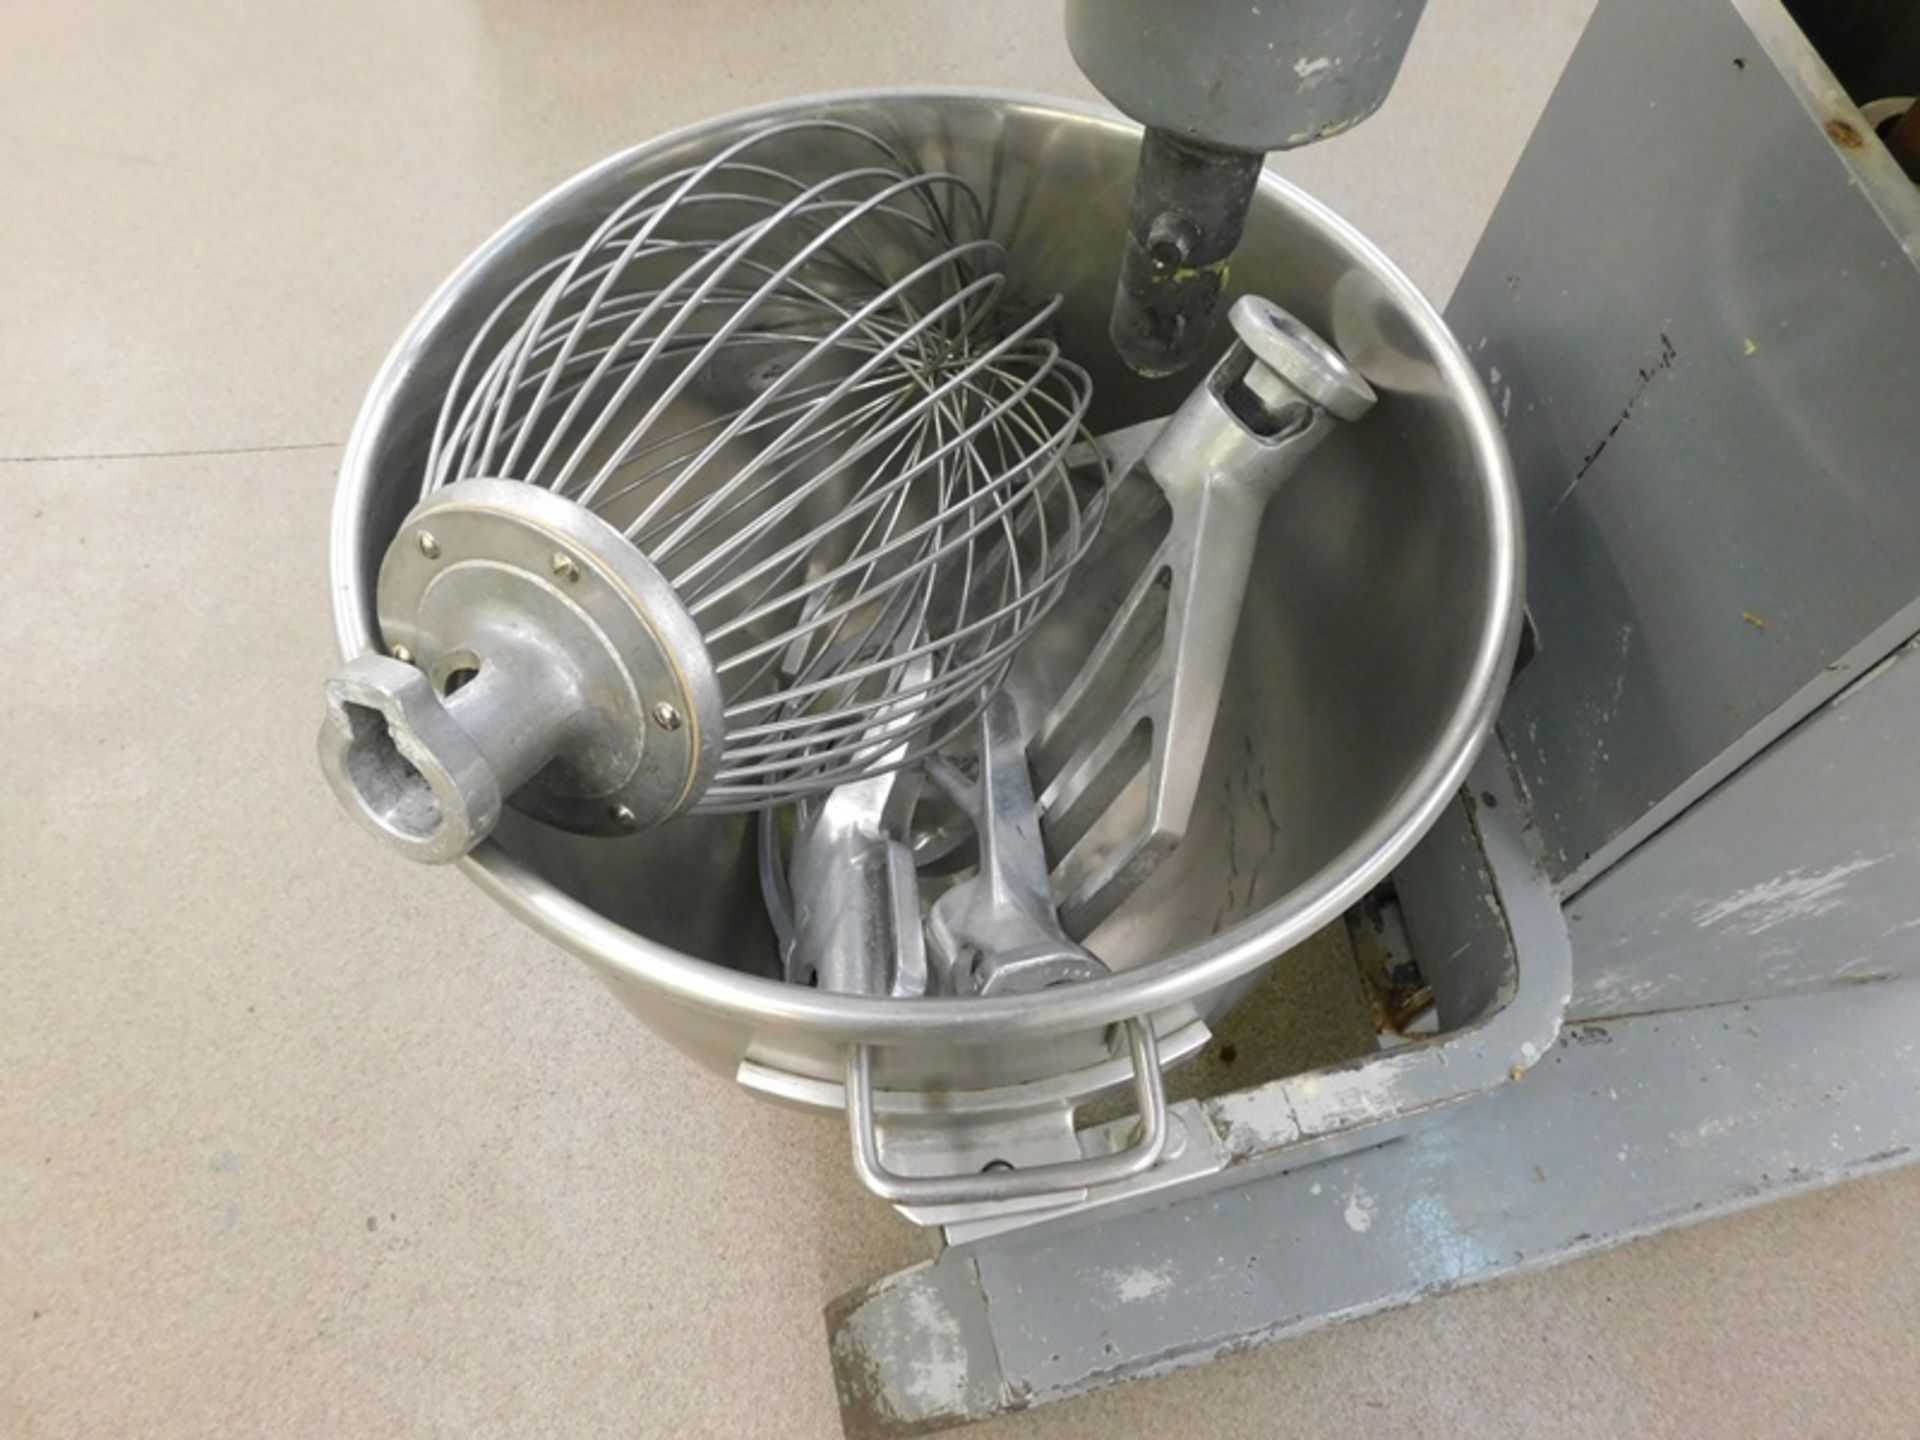 Blakeslee Mdl. DD60T Mixer, Ser. #57930-000, with stainless steel bowl and attachments, 230 volts, - Image 4 of 5